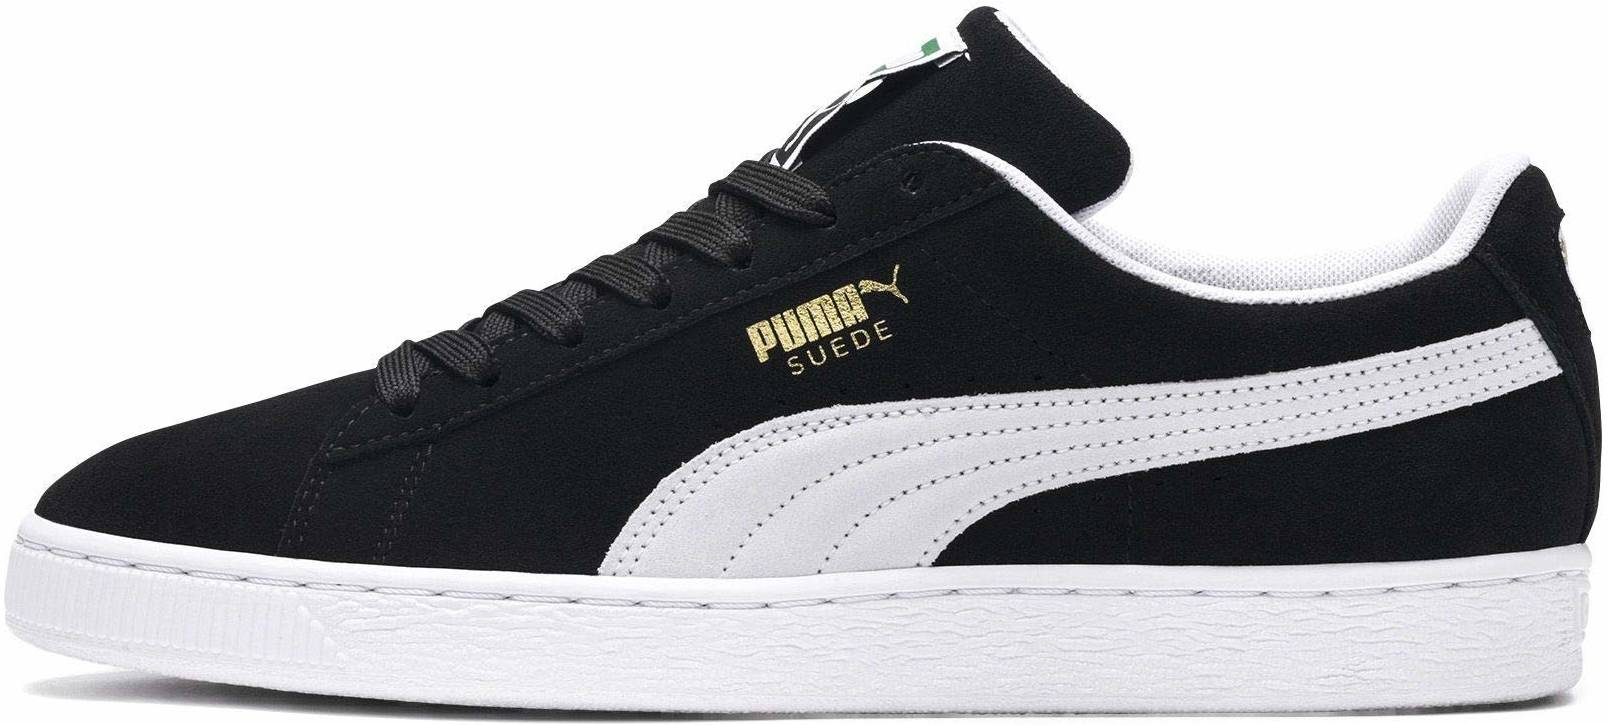 Puma Suede Classic sneakers in 10 colors (only $32) | RunRepeat